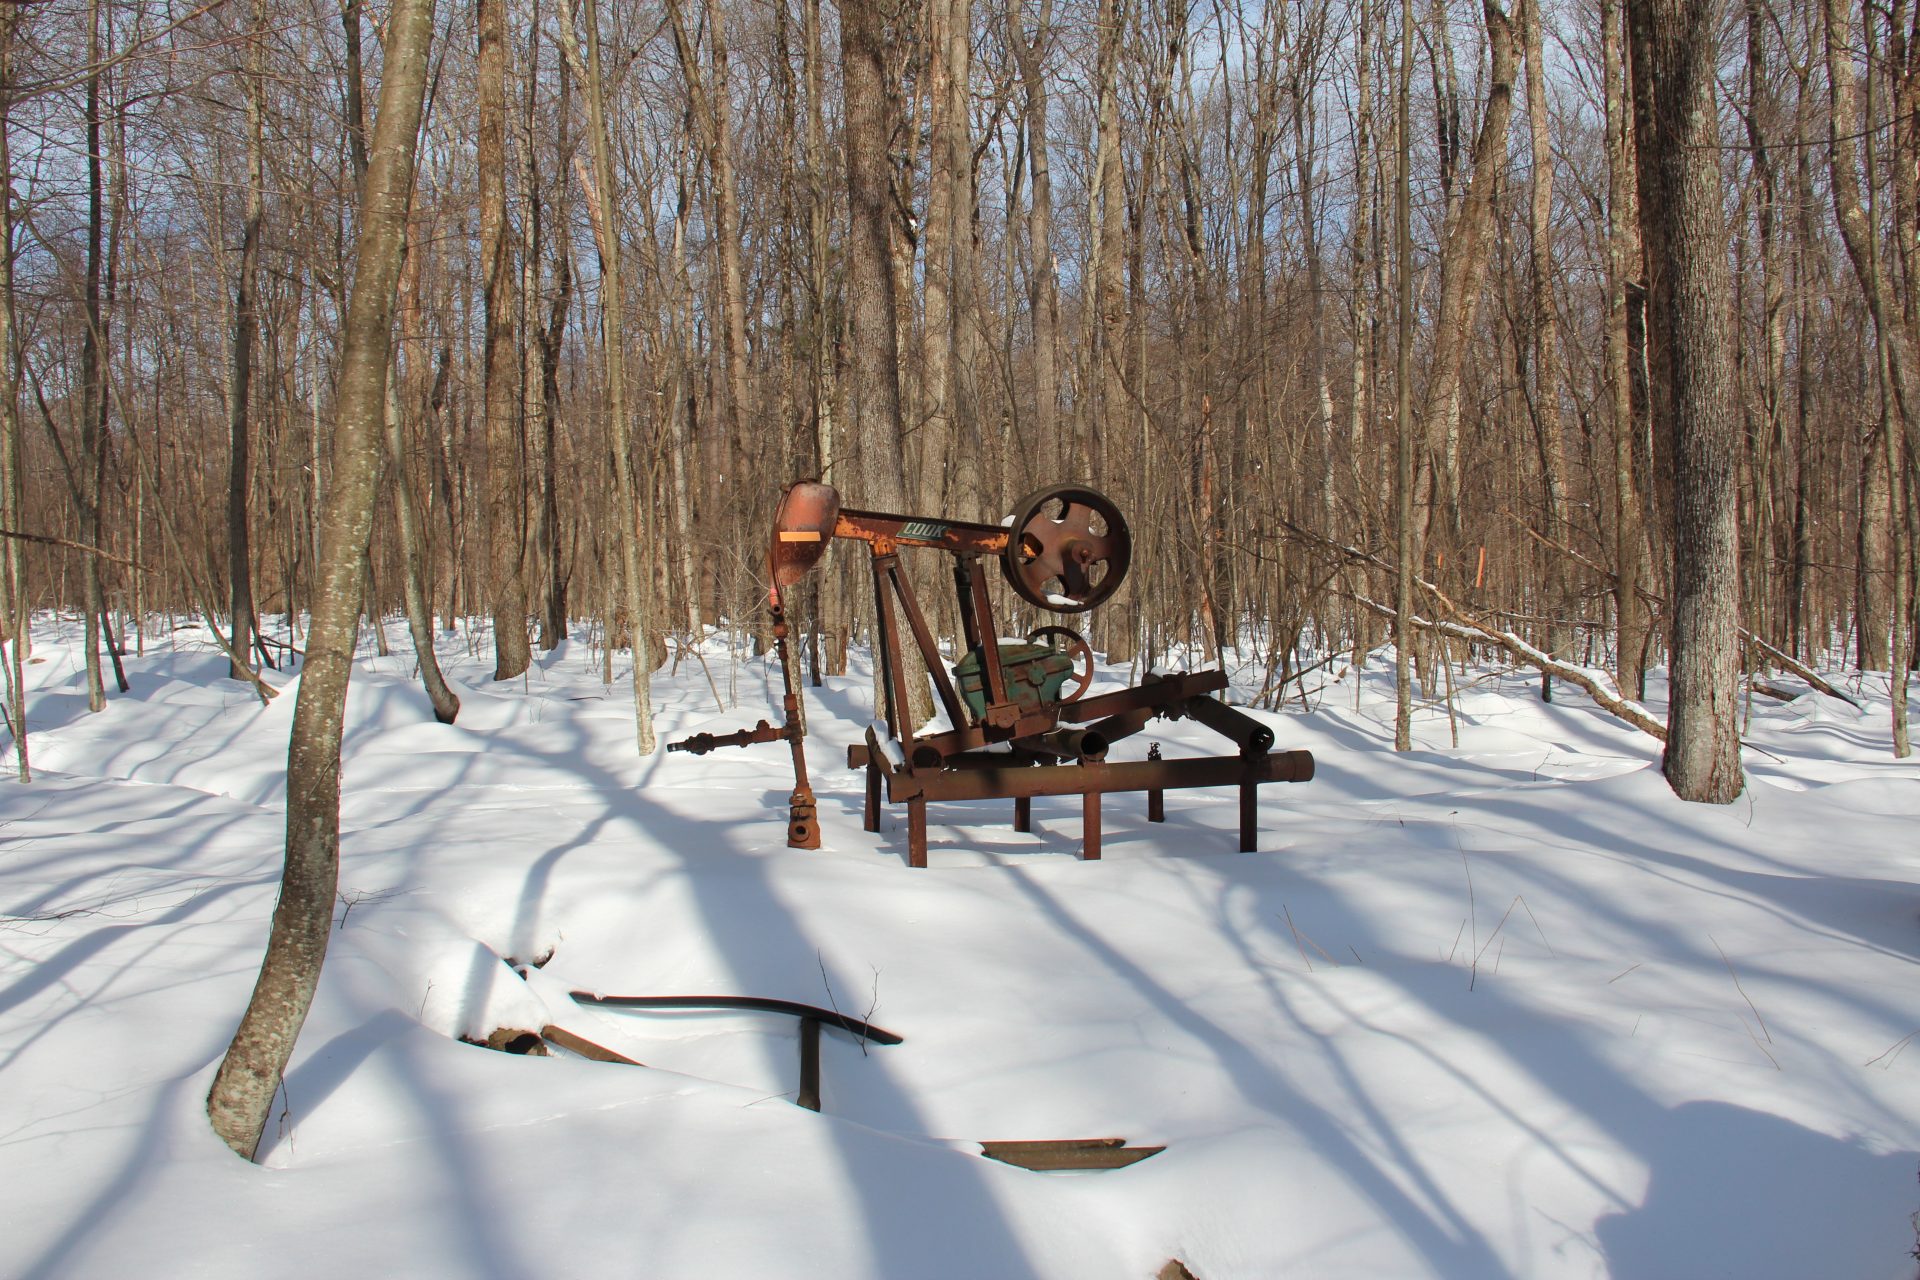 An rusty, abandoned oil well in a snow-covered forest